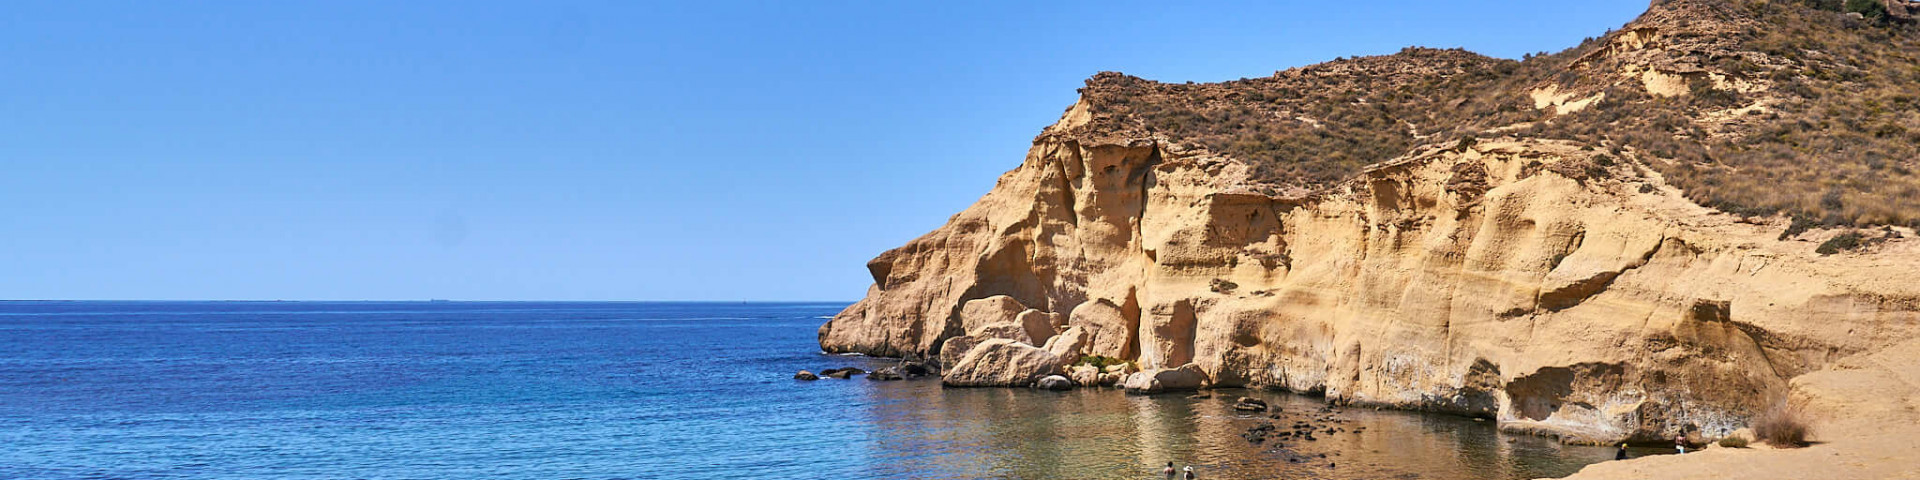 Playa de los Cocedores, a beach famous for coves on the Spanish Mediterranean coast